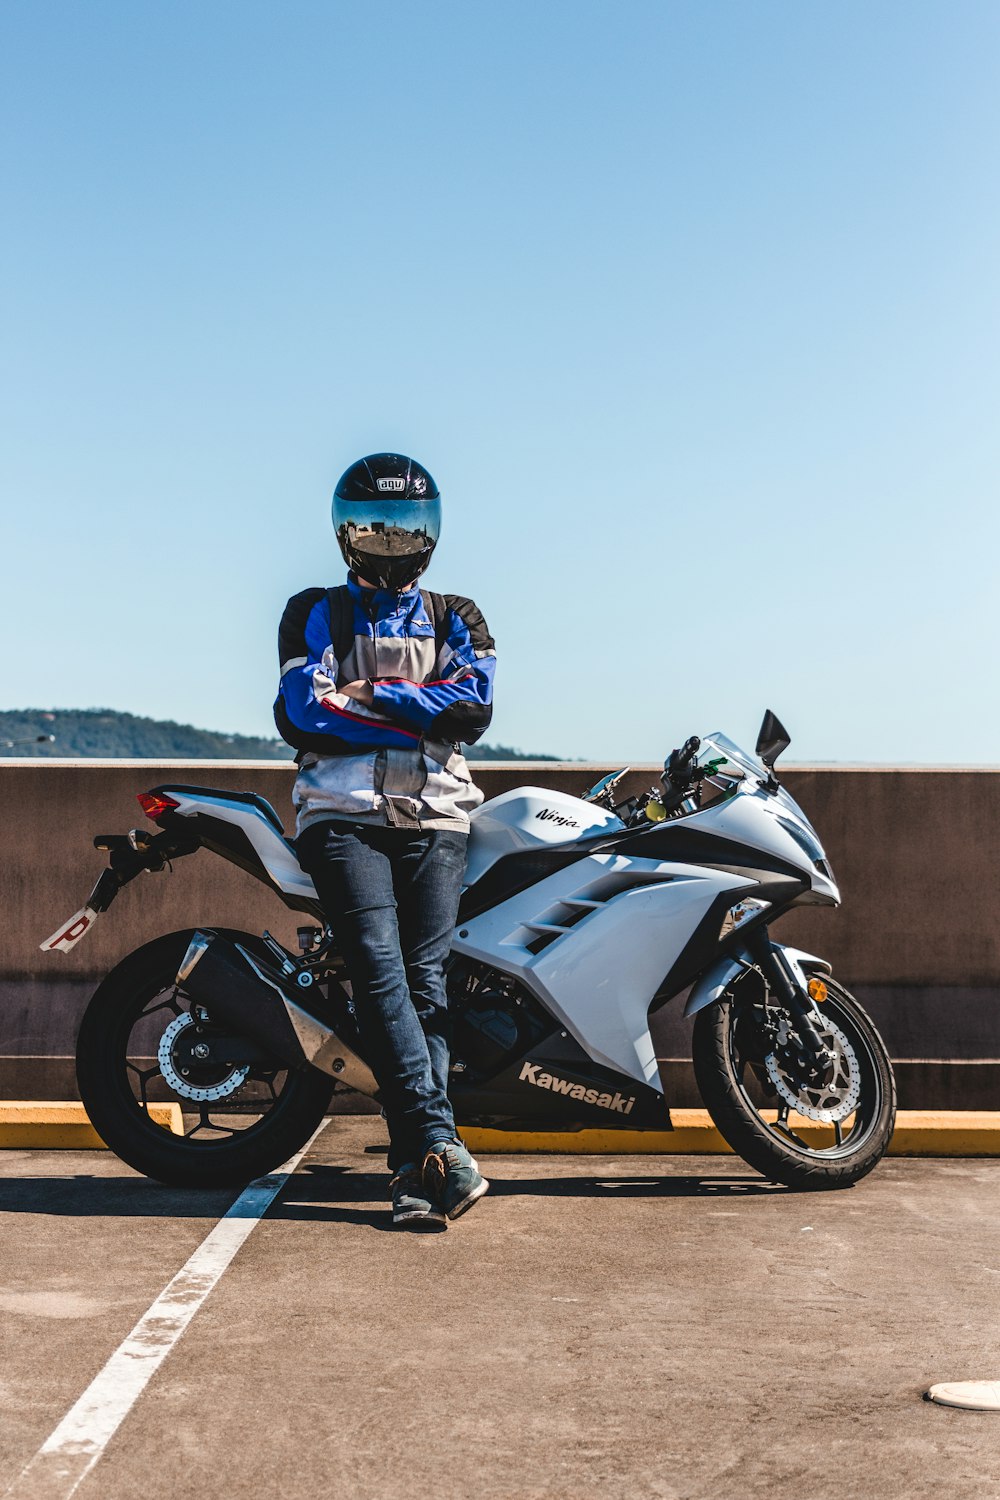 person wearing helmet standing and leaning on Kawasaki sports bike during daytime